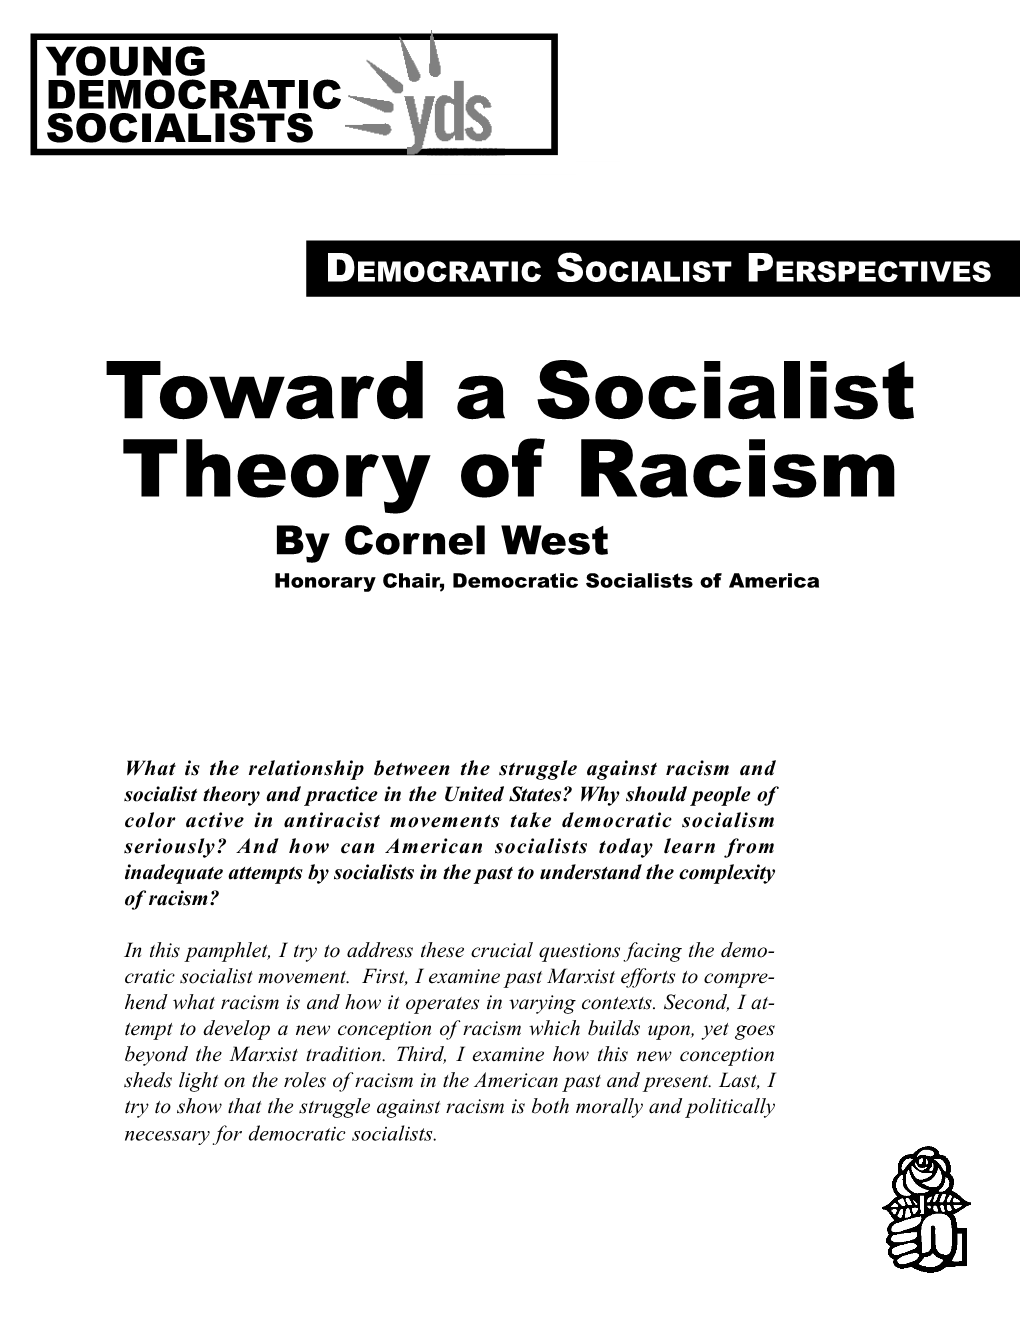 Toward a Socialist Theory of Racism by Cornel West Honorary Chair, Democratic Socialists of America